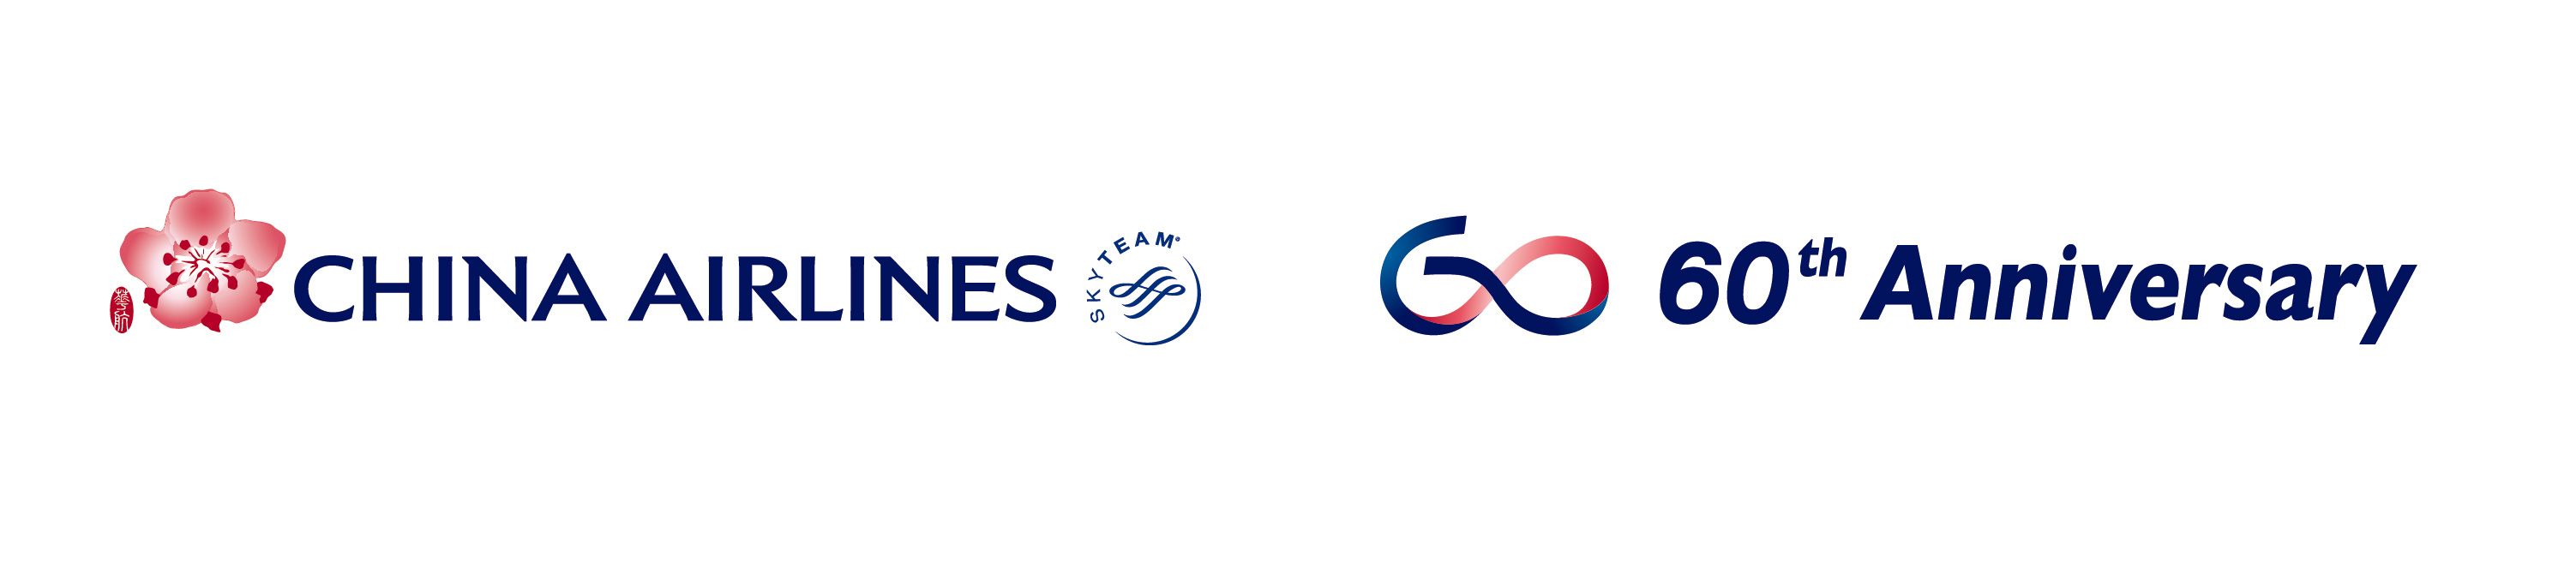 China Airlines Online Sales 60周年CI logo Horz